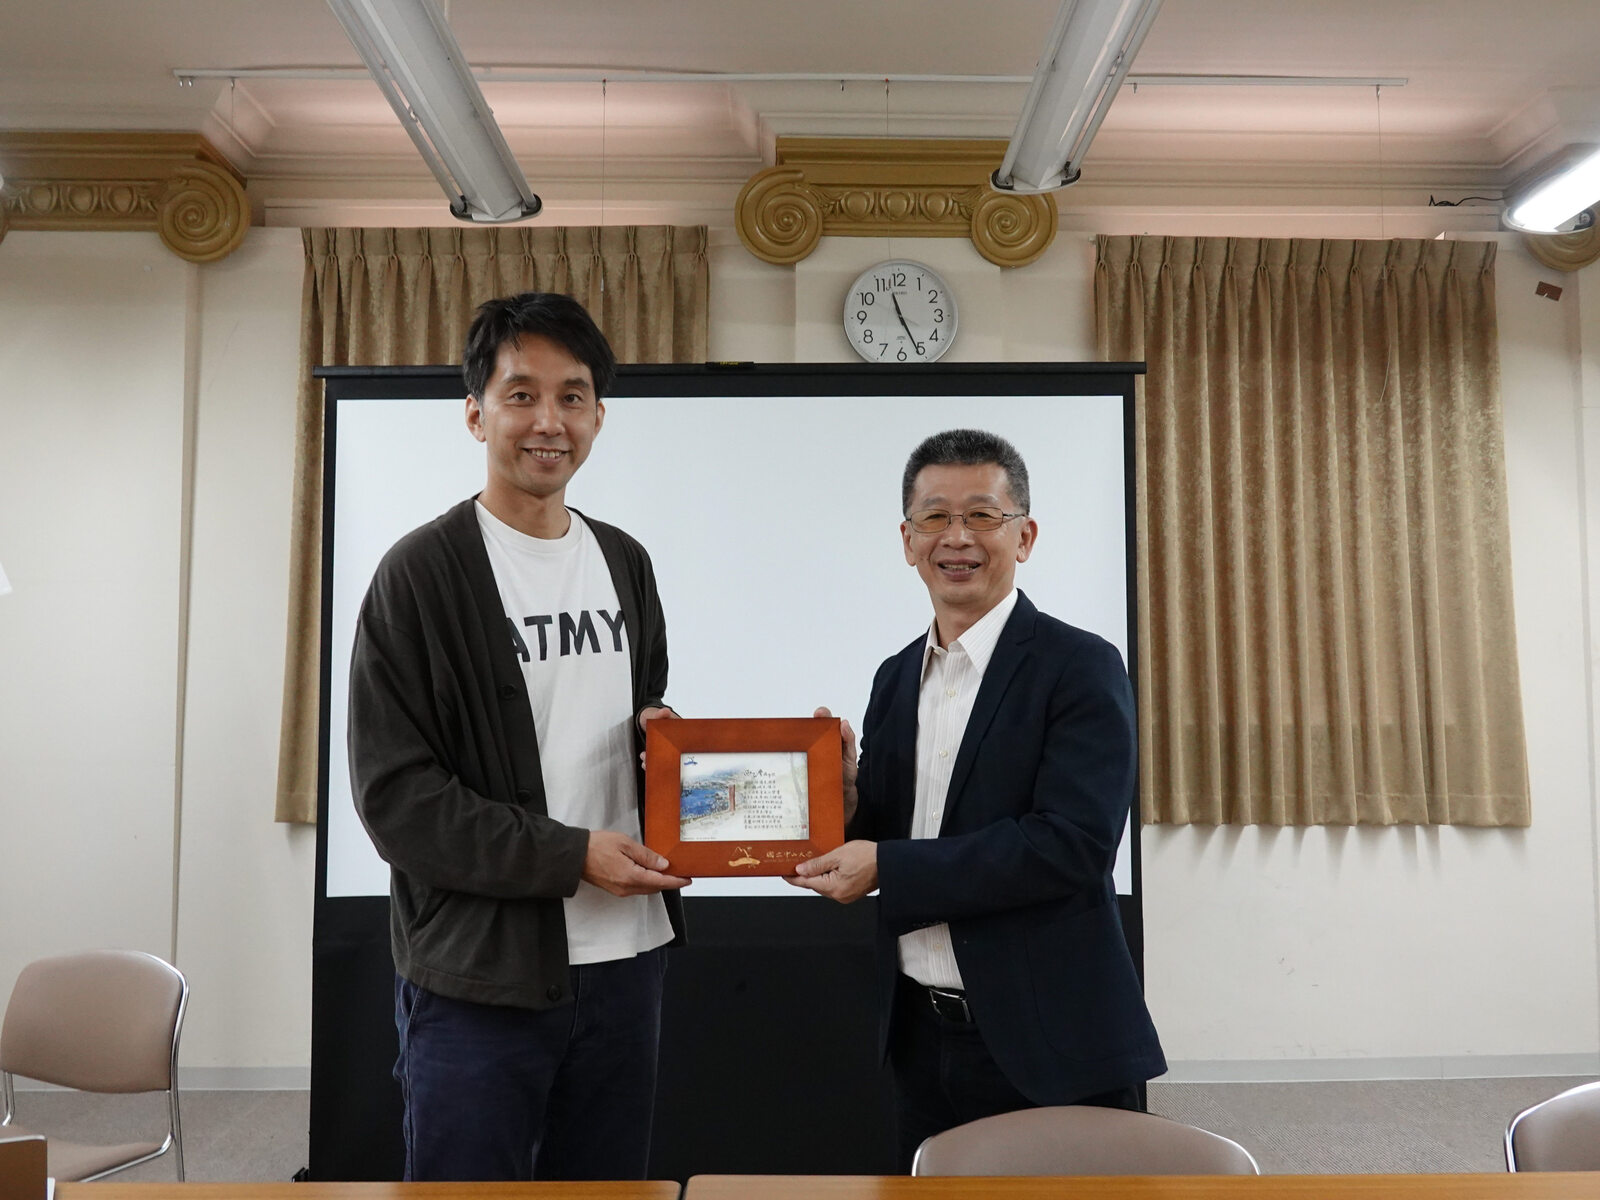 Jui-Kun Kuo, a professor of the Institute of Public Affairs Management at NSYSU, presented souvenirs to Mr. Ichiki